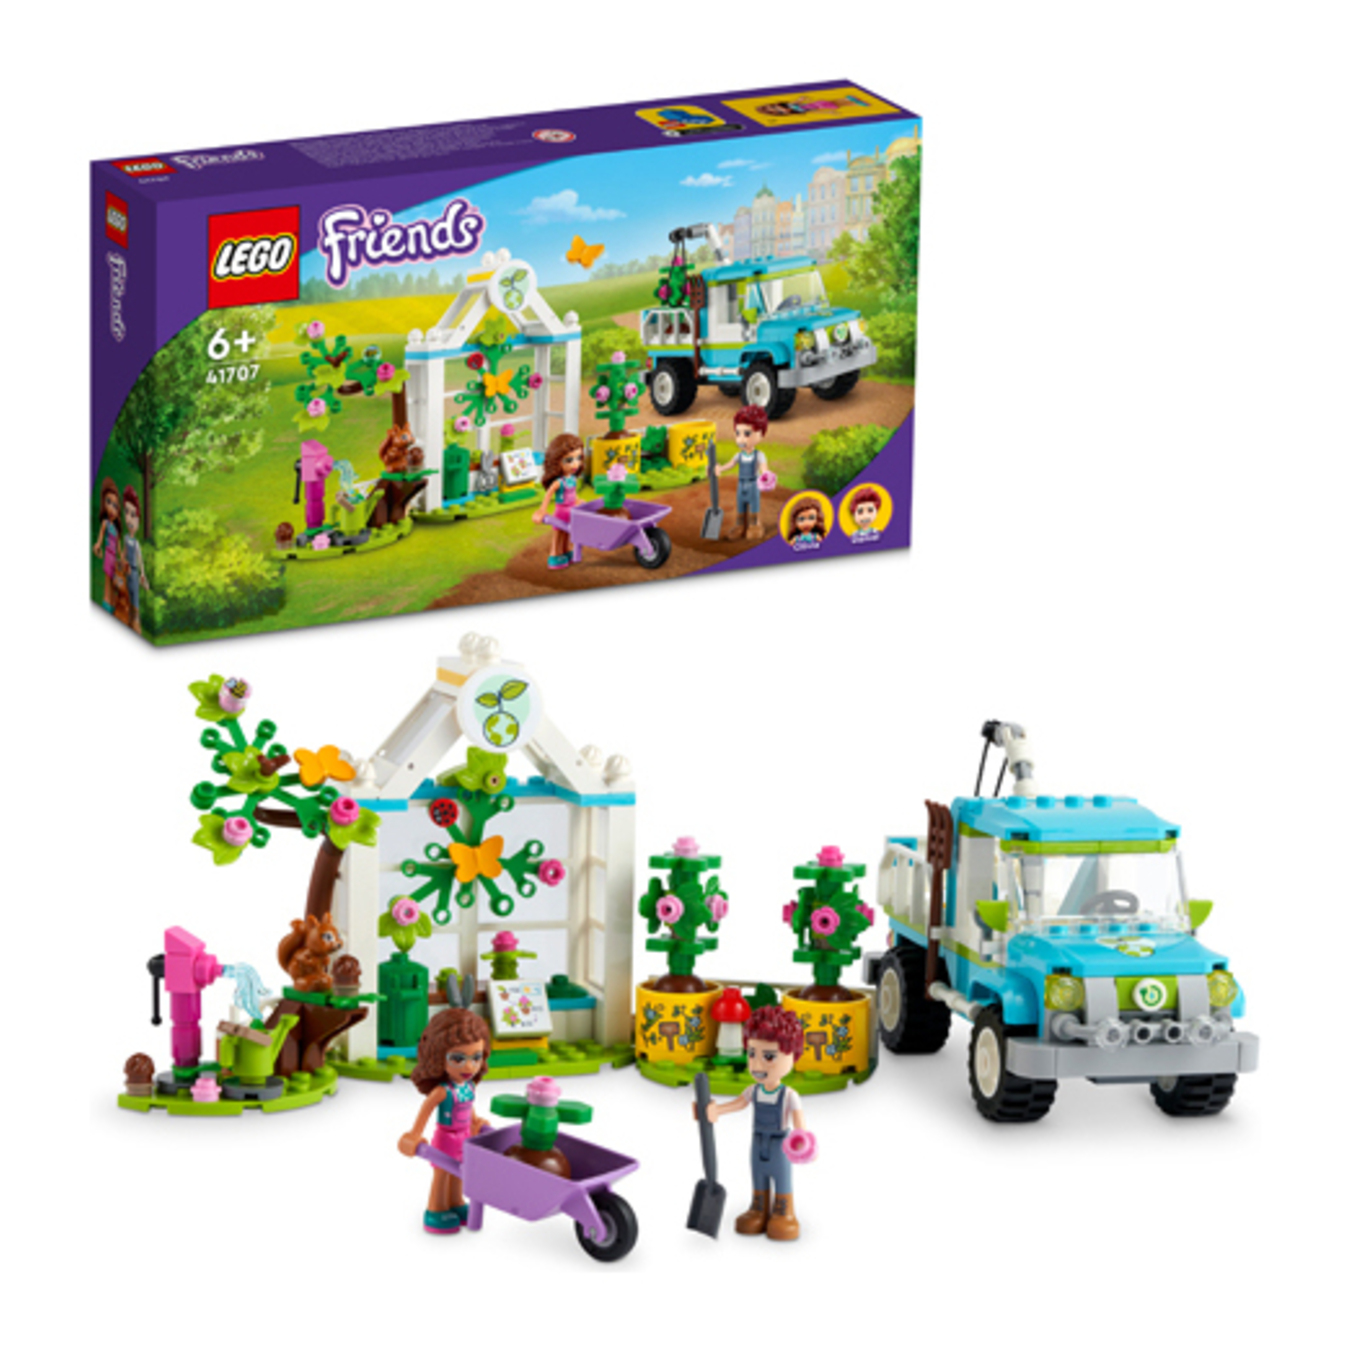 Constructor LEGO Friends Car for planting trees 2